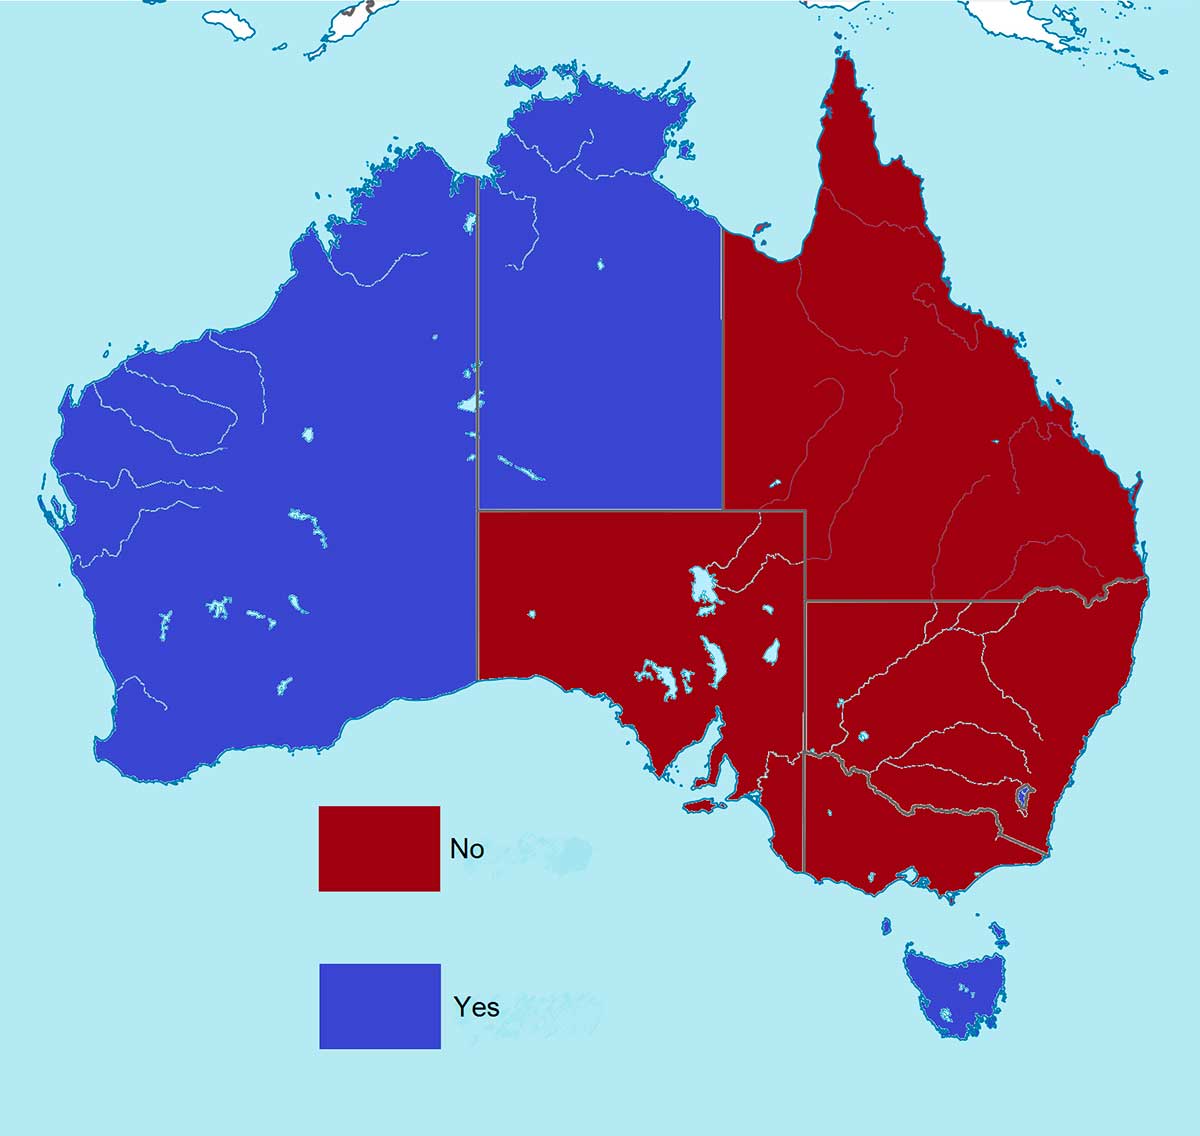 Map of Australia showing half represented in blue and half in red. A key indicates 'No' as red and blue as 'Yes'.